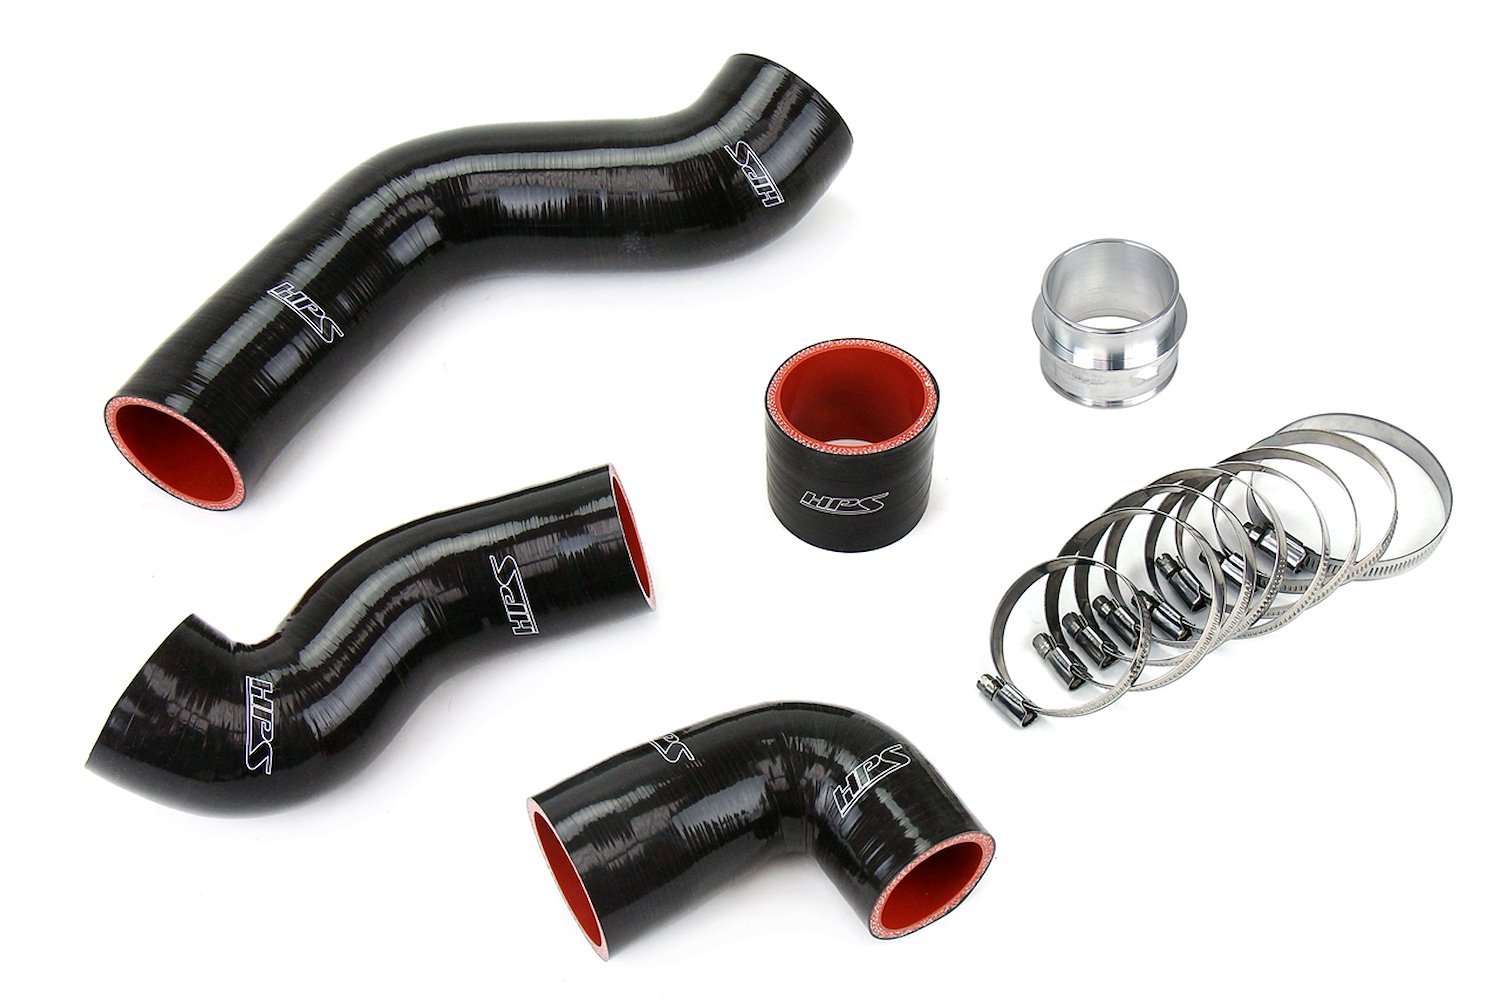 57-1845-BLK Intercooler Hose Kit, High-Temp 4-Ply Reinforced Silicone, Replace OEM Rubber Intercooler Turbo Boots